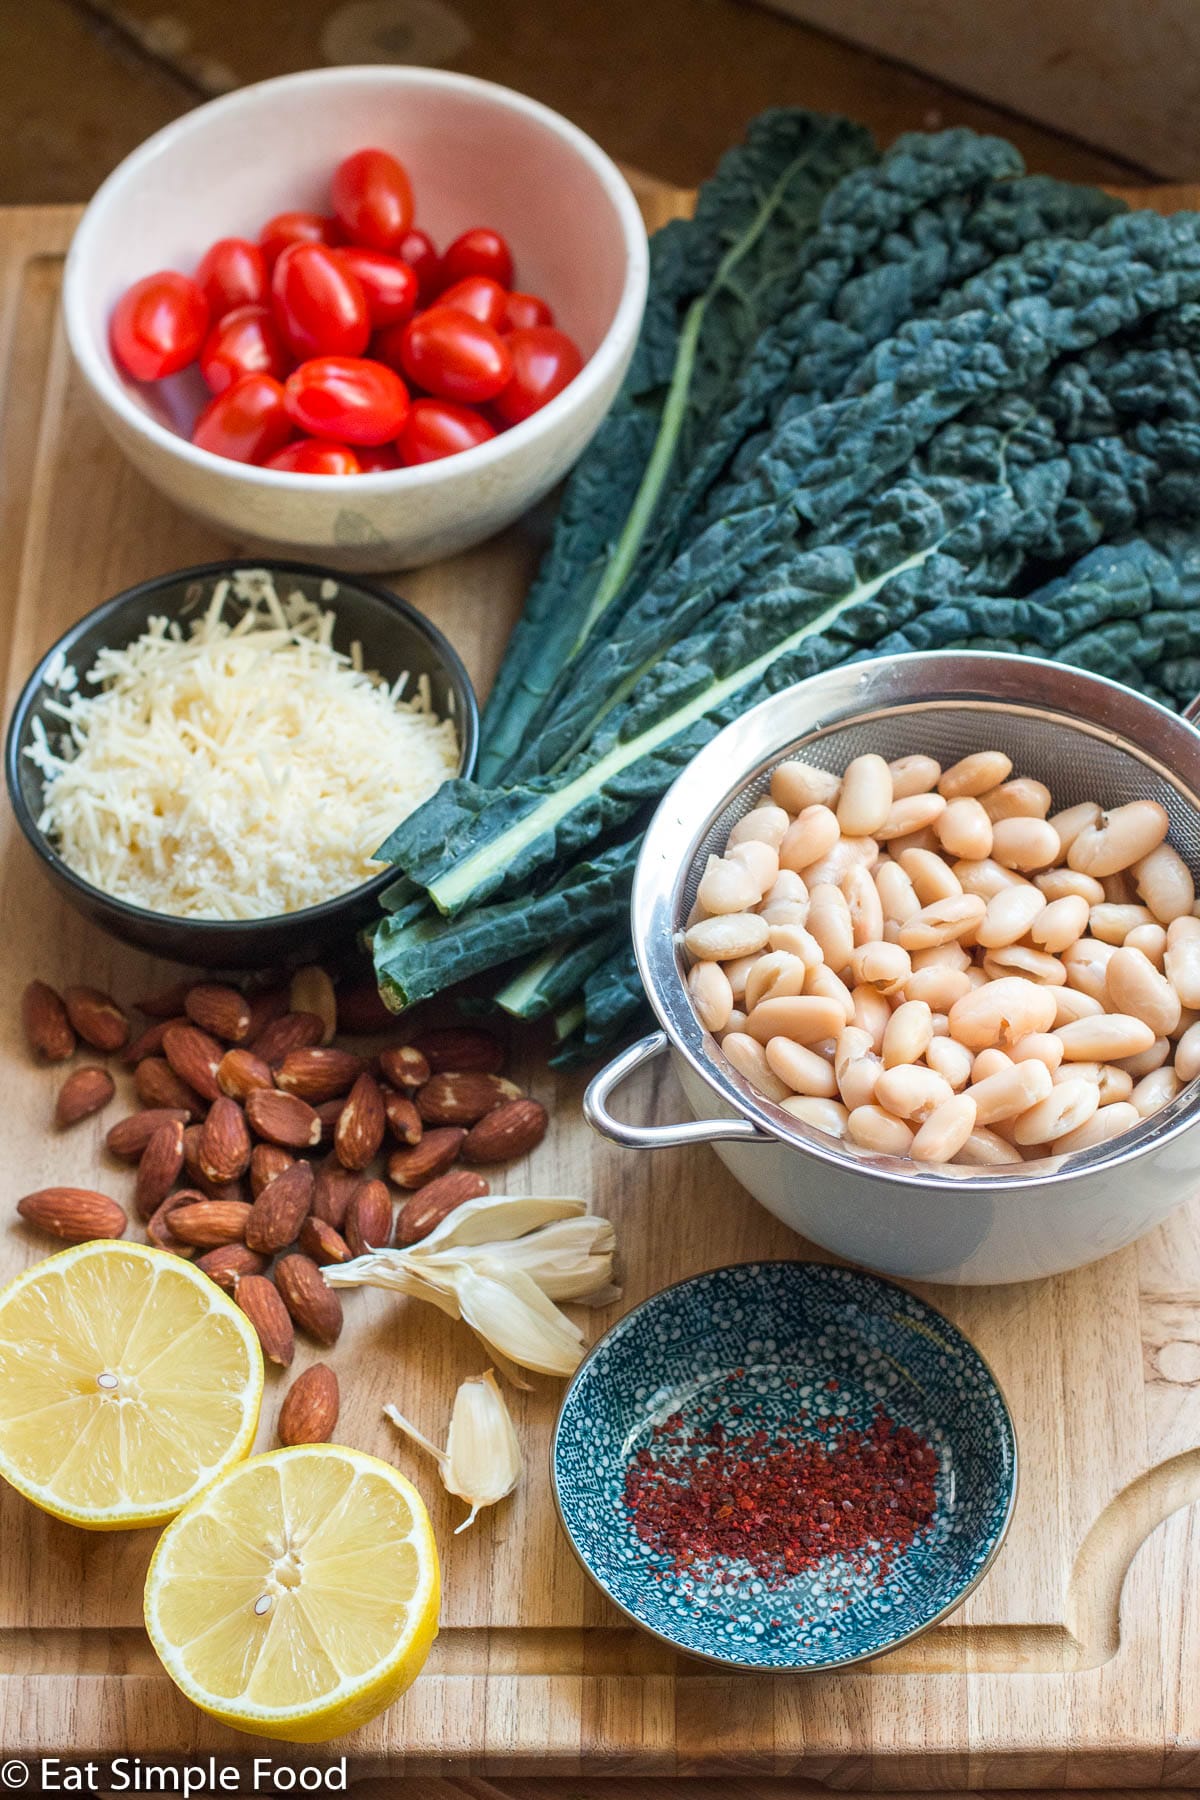 Ingredients on a wood cutting board. White beans in a strainer, bowl of cherry tomatoes, bowl of grated Parmesan cheese, bowl of chili pepper flakes, lemon cut in half, head of kale, whole almonds, and 4 garlic cloves. Side view.